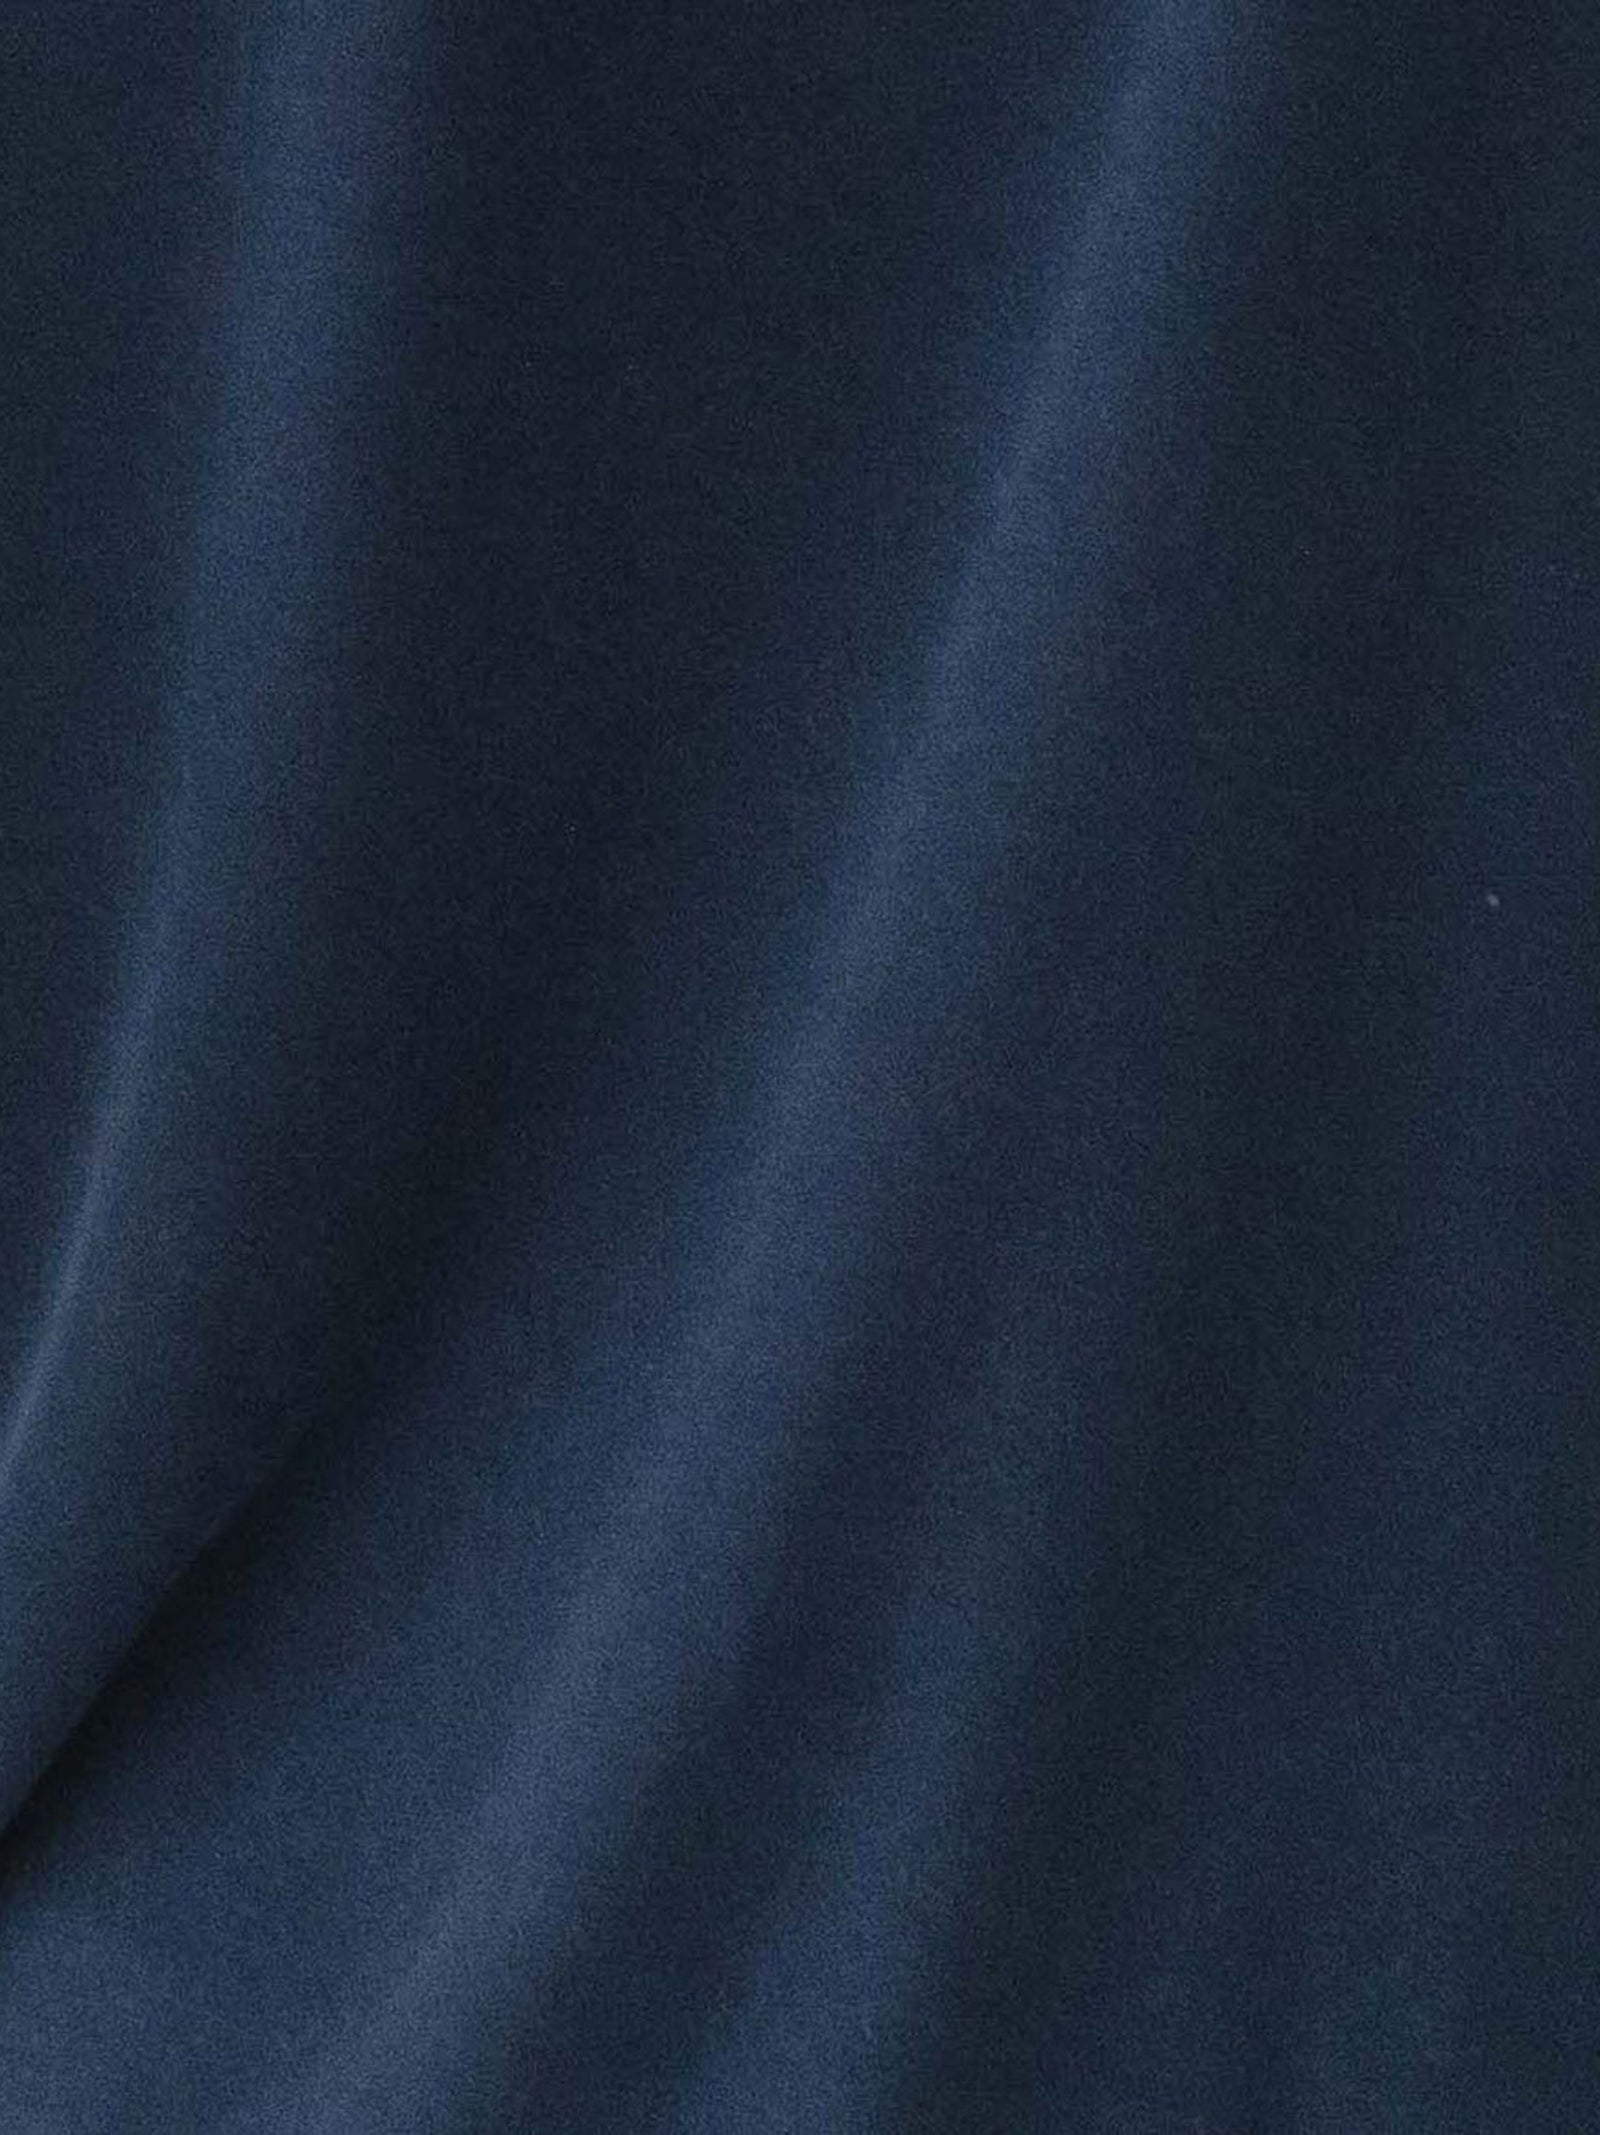 Navy Bamboo Hoodie. Photo of hoodie taken close up to show the material.